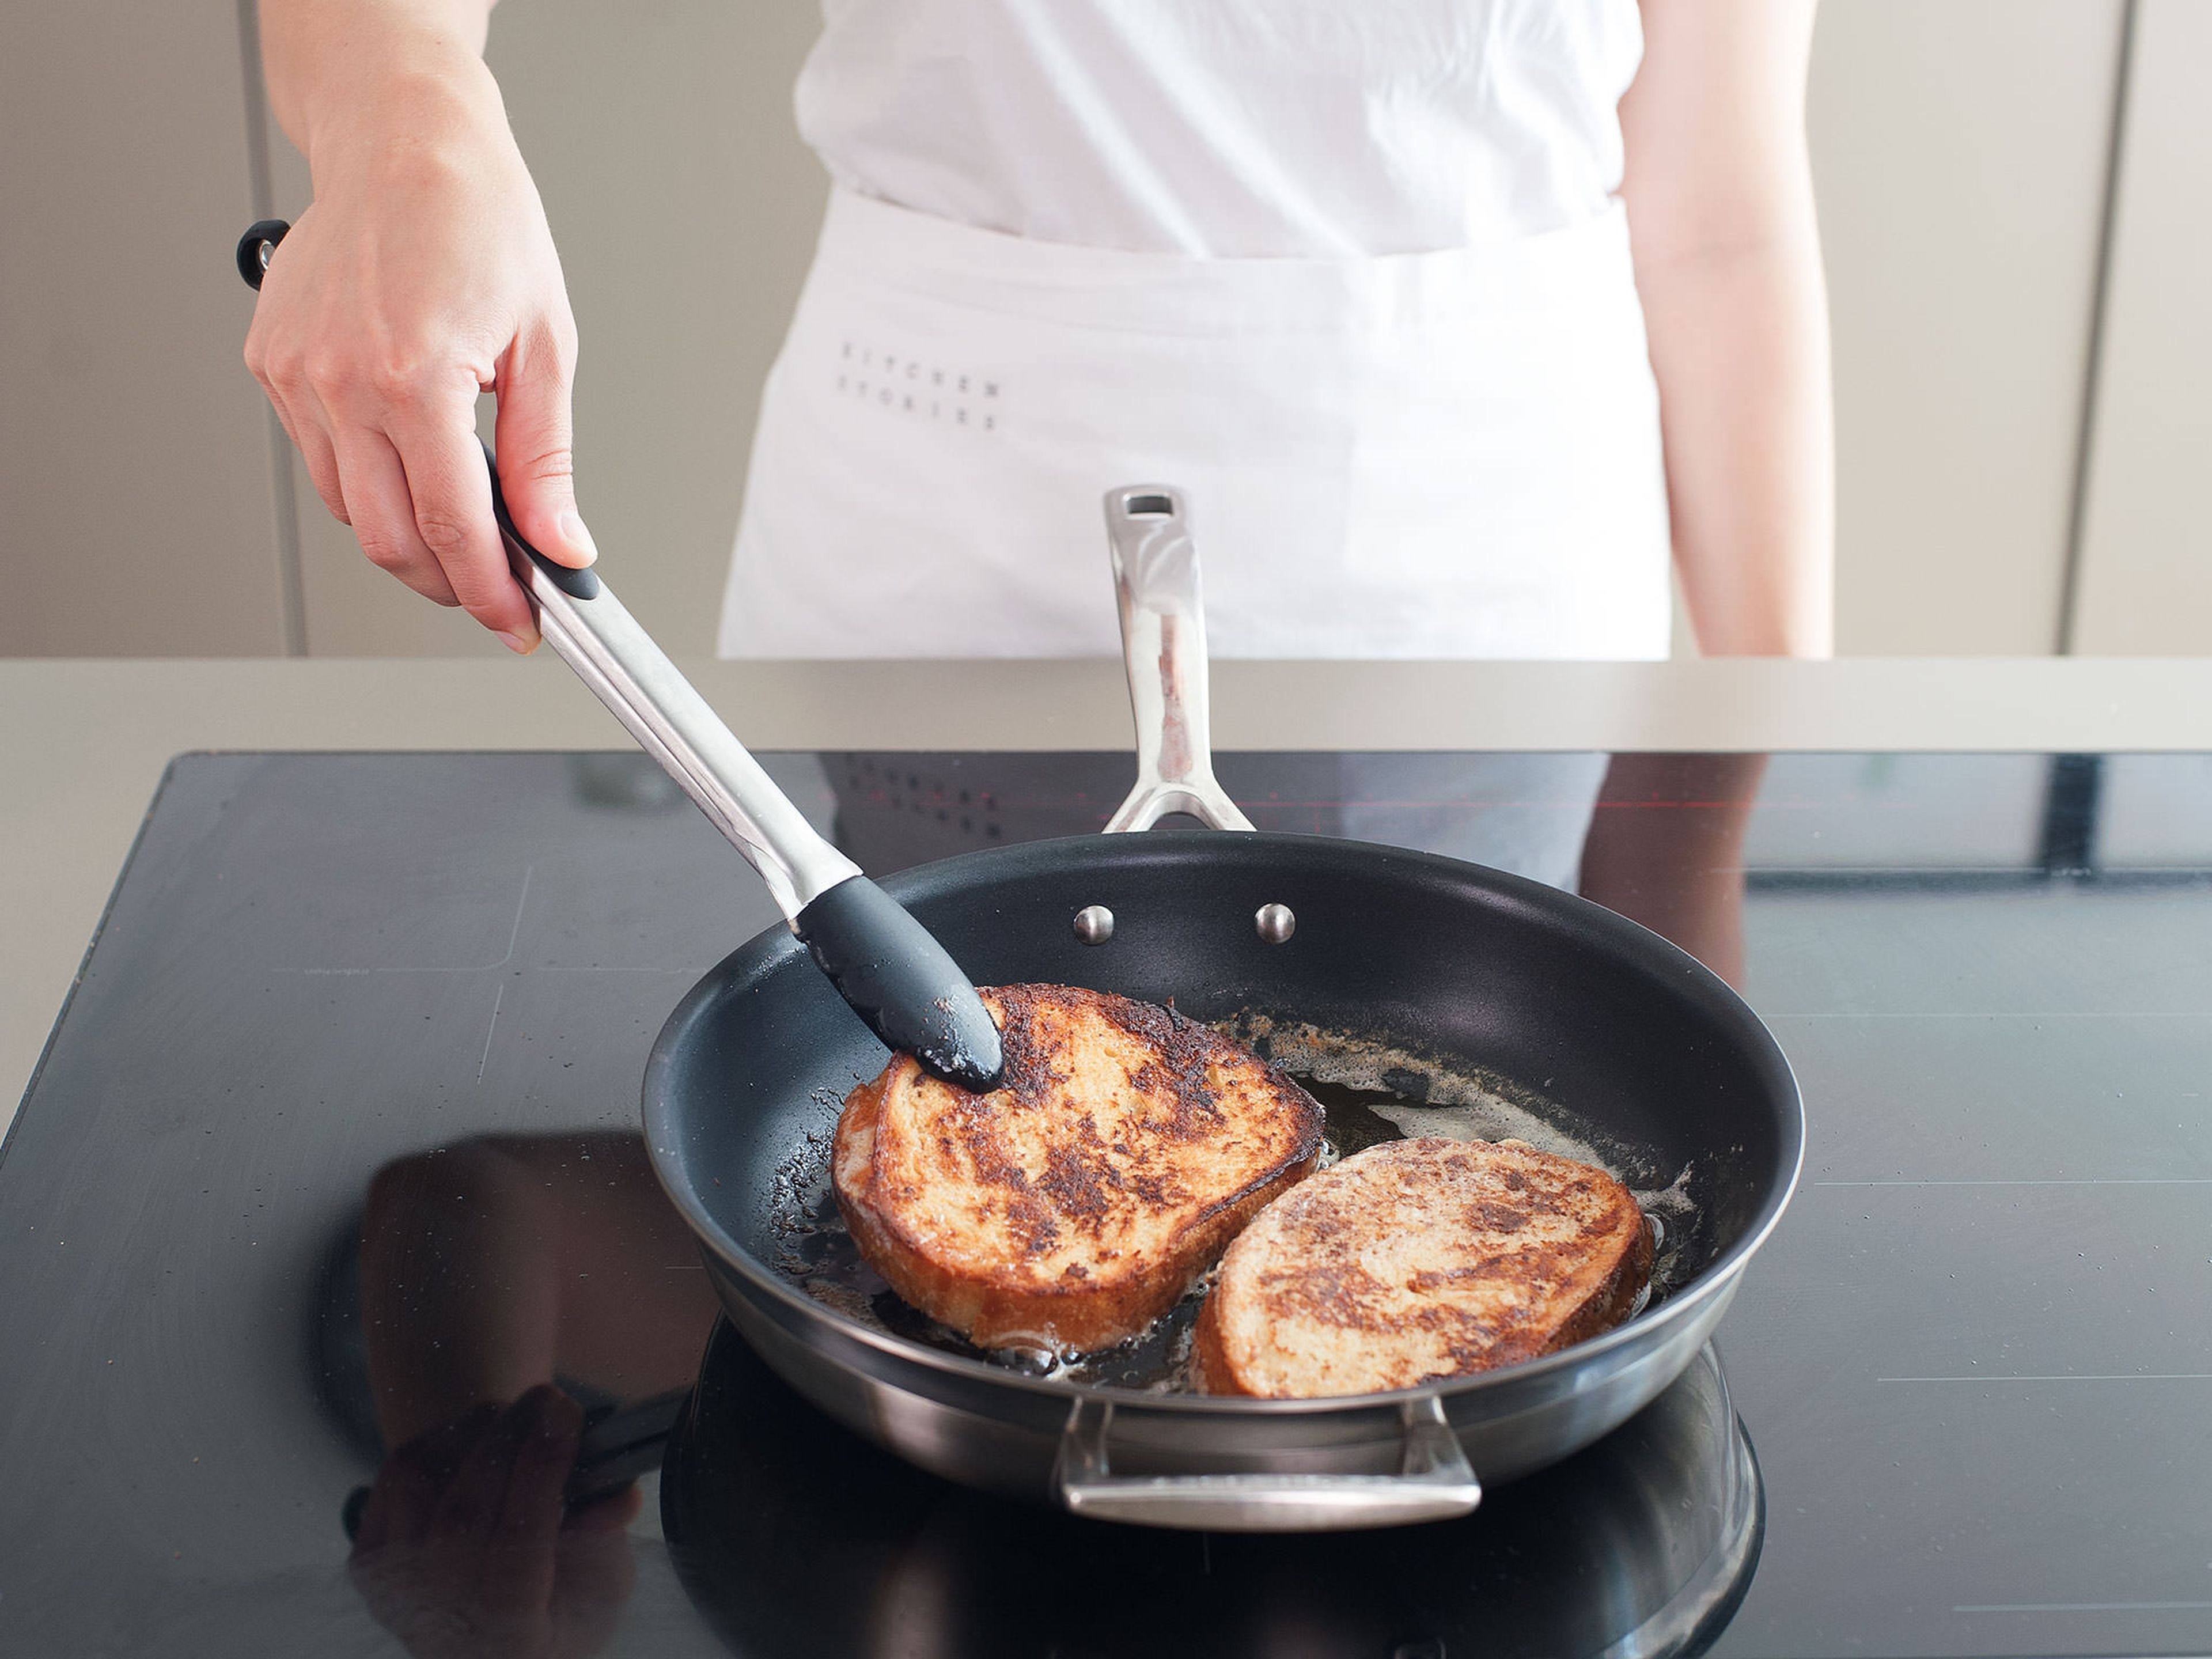 In a frying pan, melt butter over medium heat and sauté bread for approx.  2 – 3 min. per side until golden brown. Cut diagonally and serve with maple syrup.